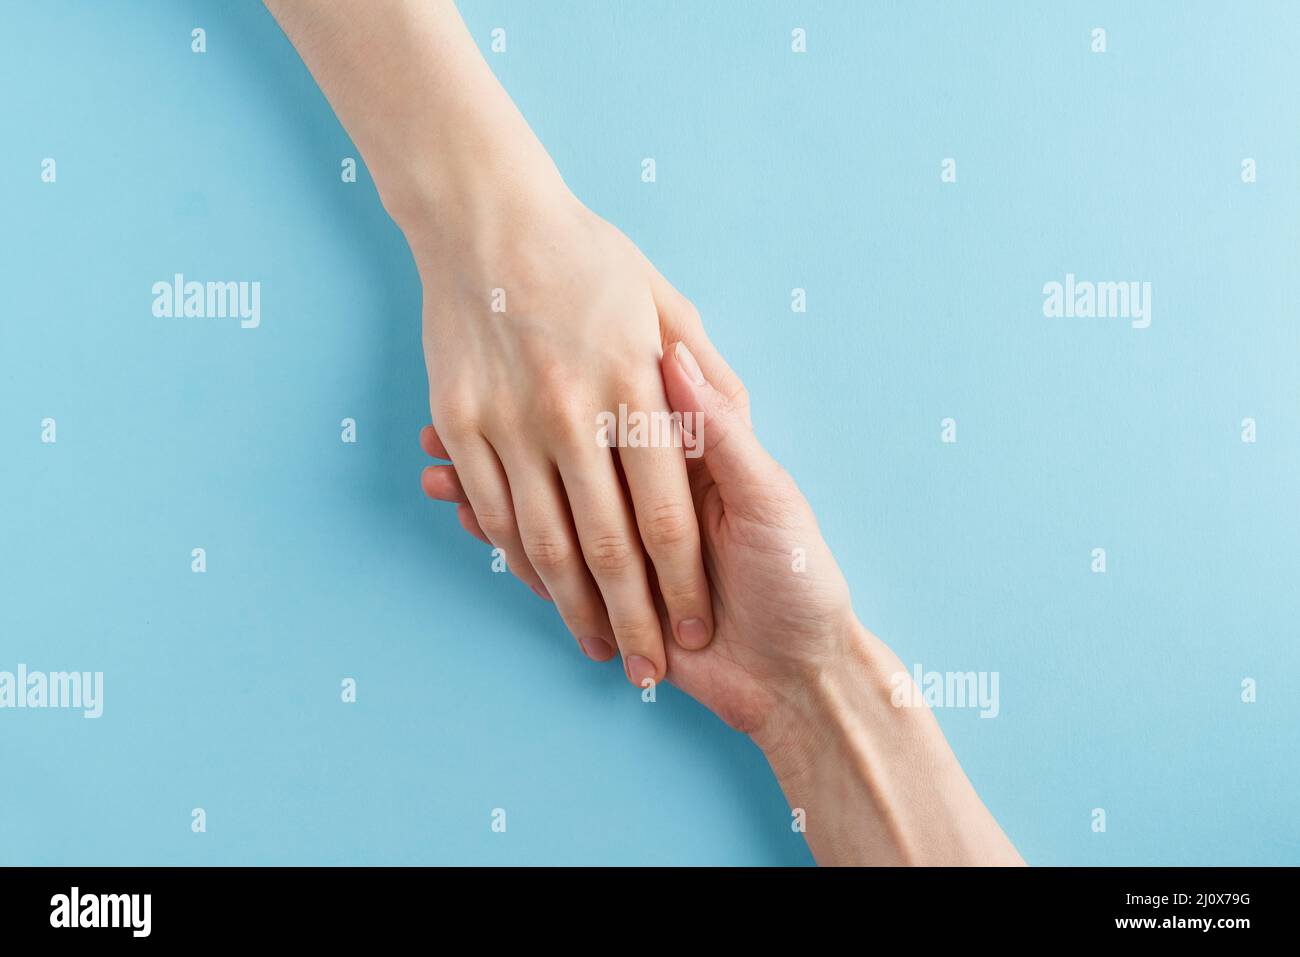 Helping hand, support in difficult situation, crisis. Last chance, hope concept Stock Photo